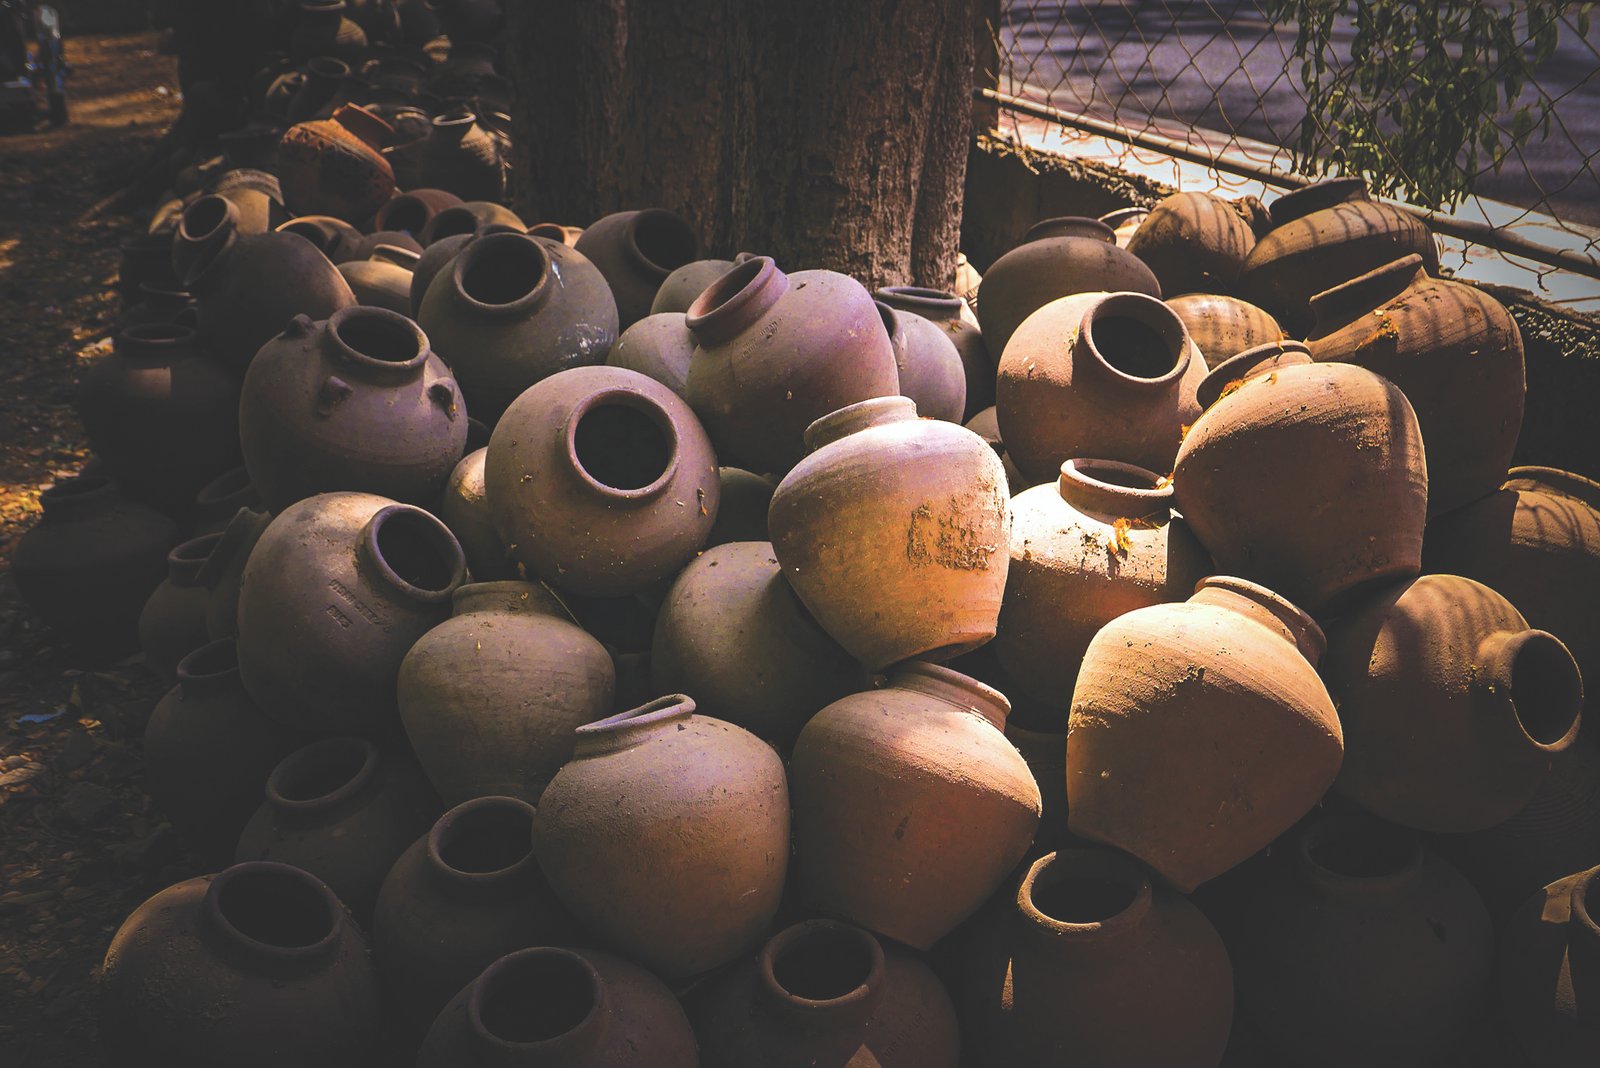 Burnay pottery-making, a dying craft?